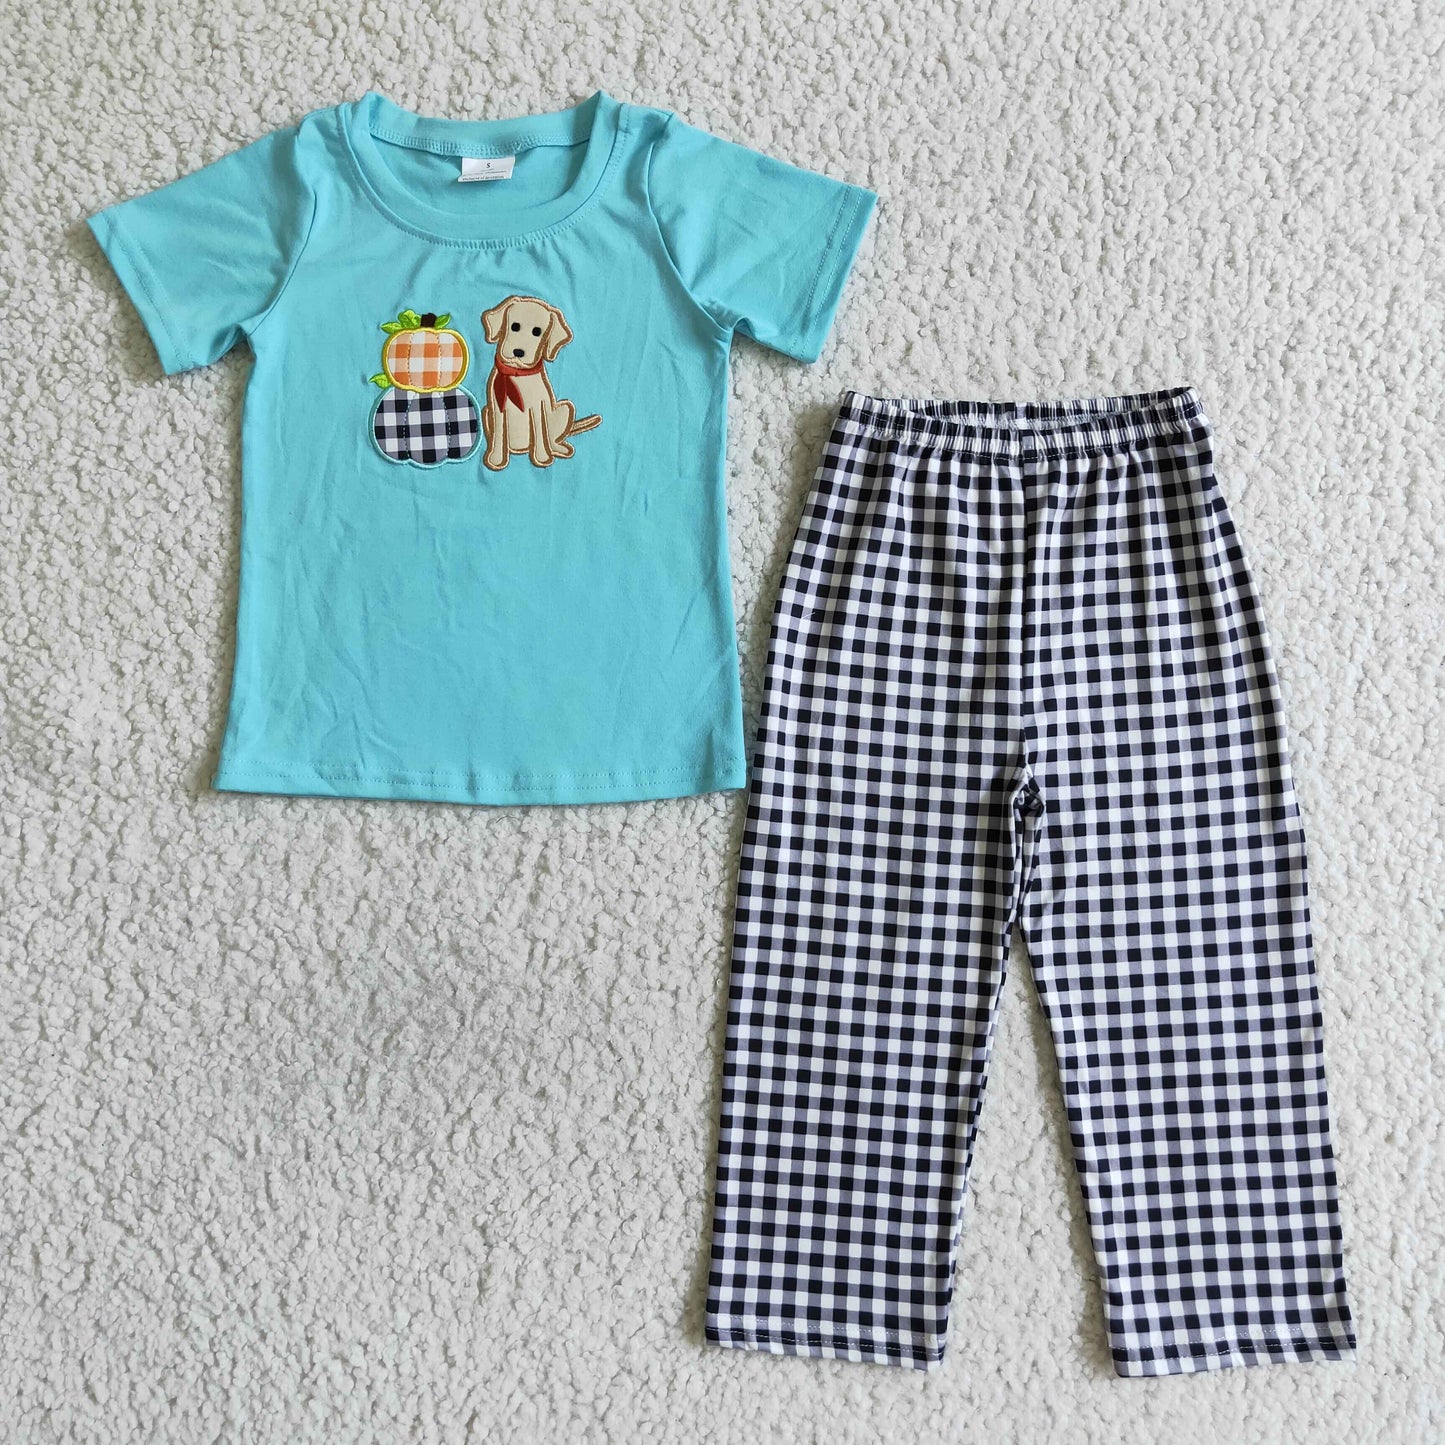 Dog pumpkin embroidery plaid pants baby boy fall clothes